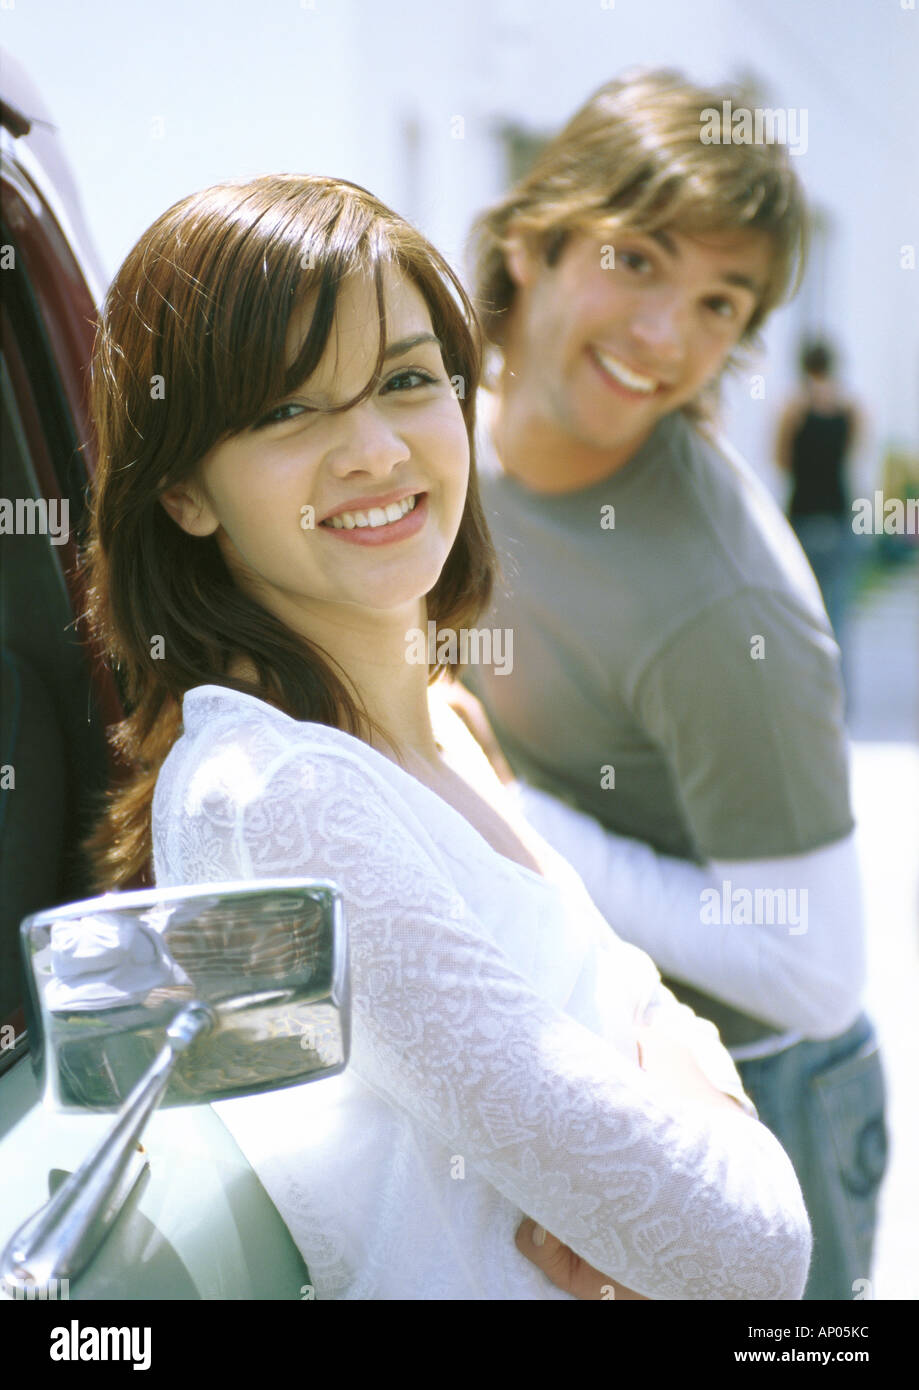 Young woman leaning against truck, man making face behind her Stock Photo